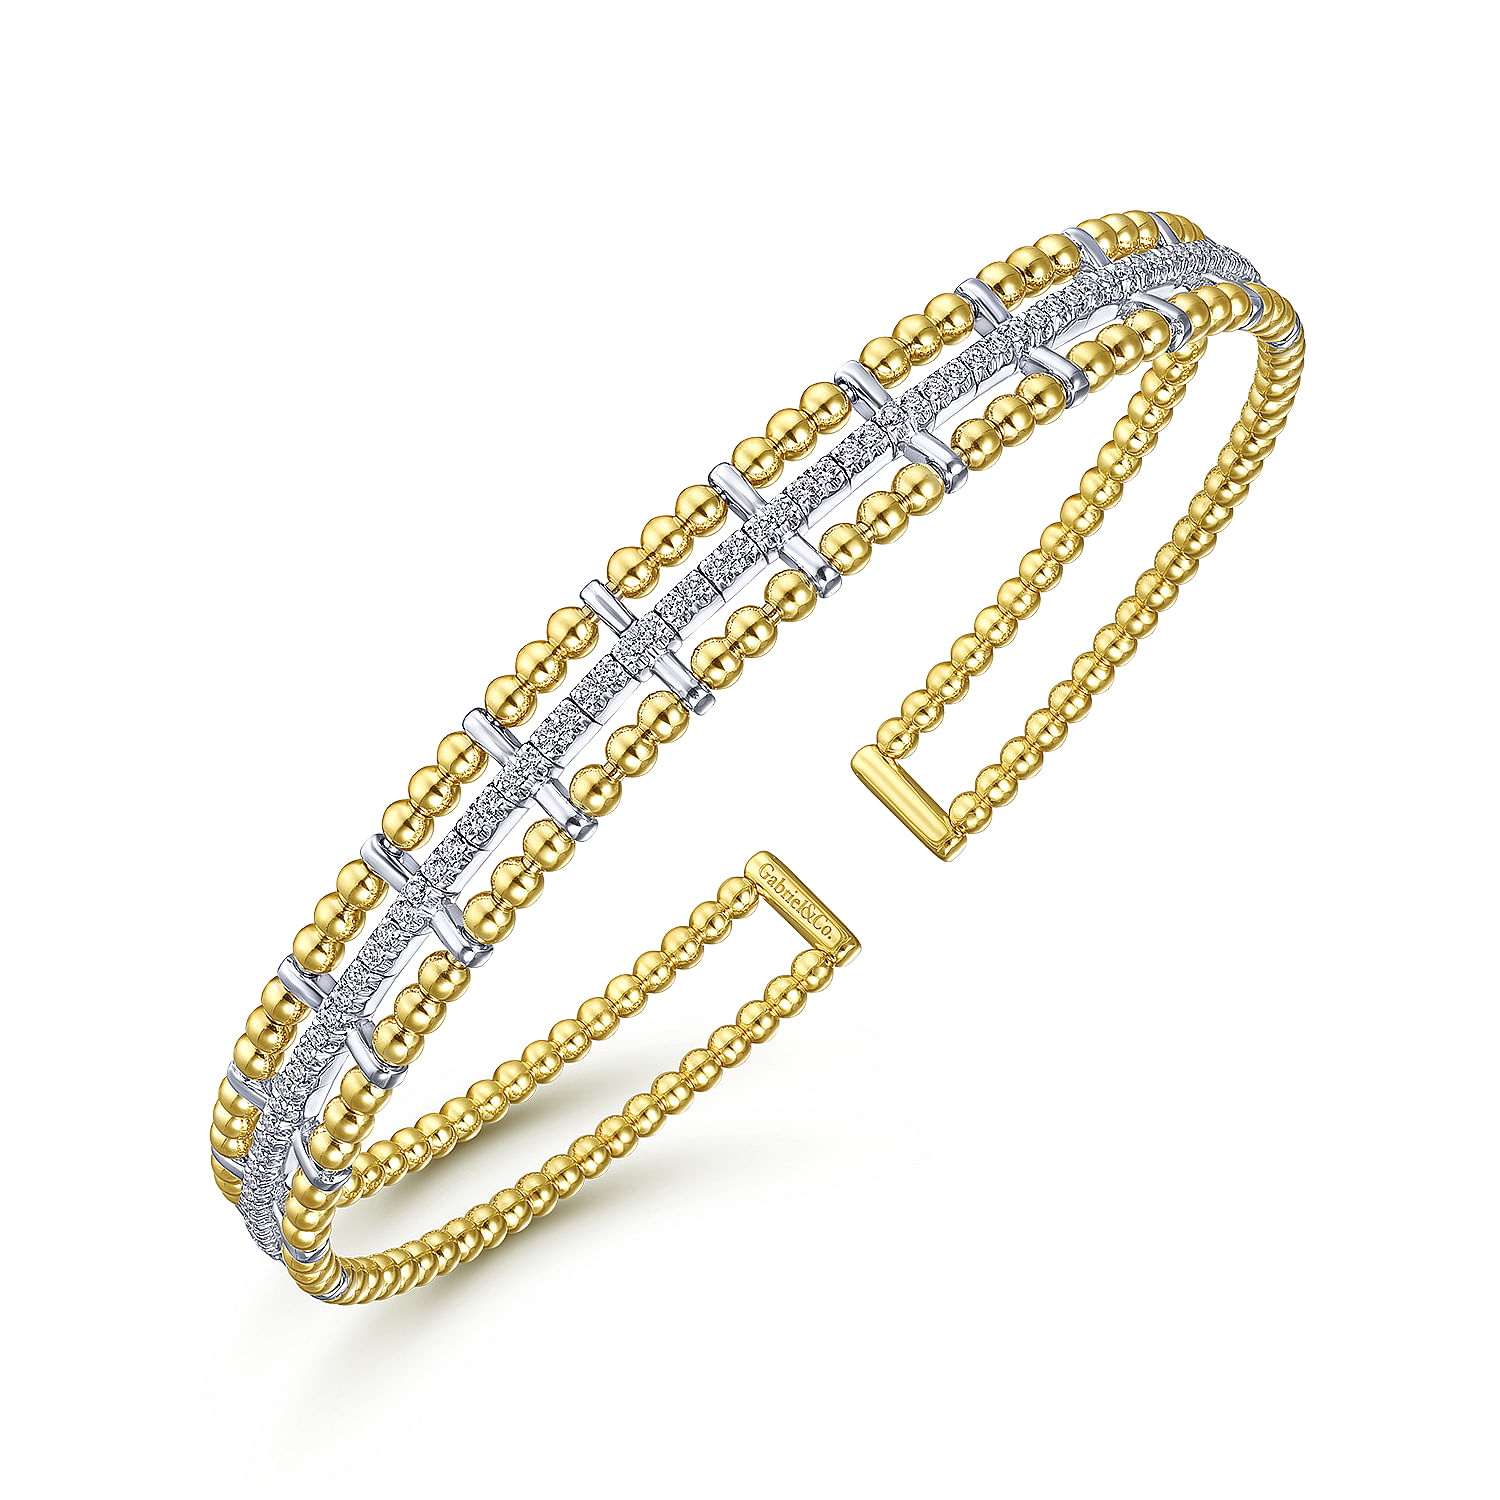 14K Yellow and White Gold Bujukan Bead Cuff Bracelet with Inner Diamond Channel